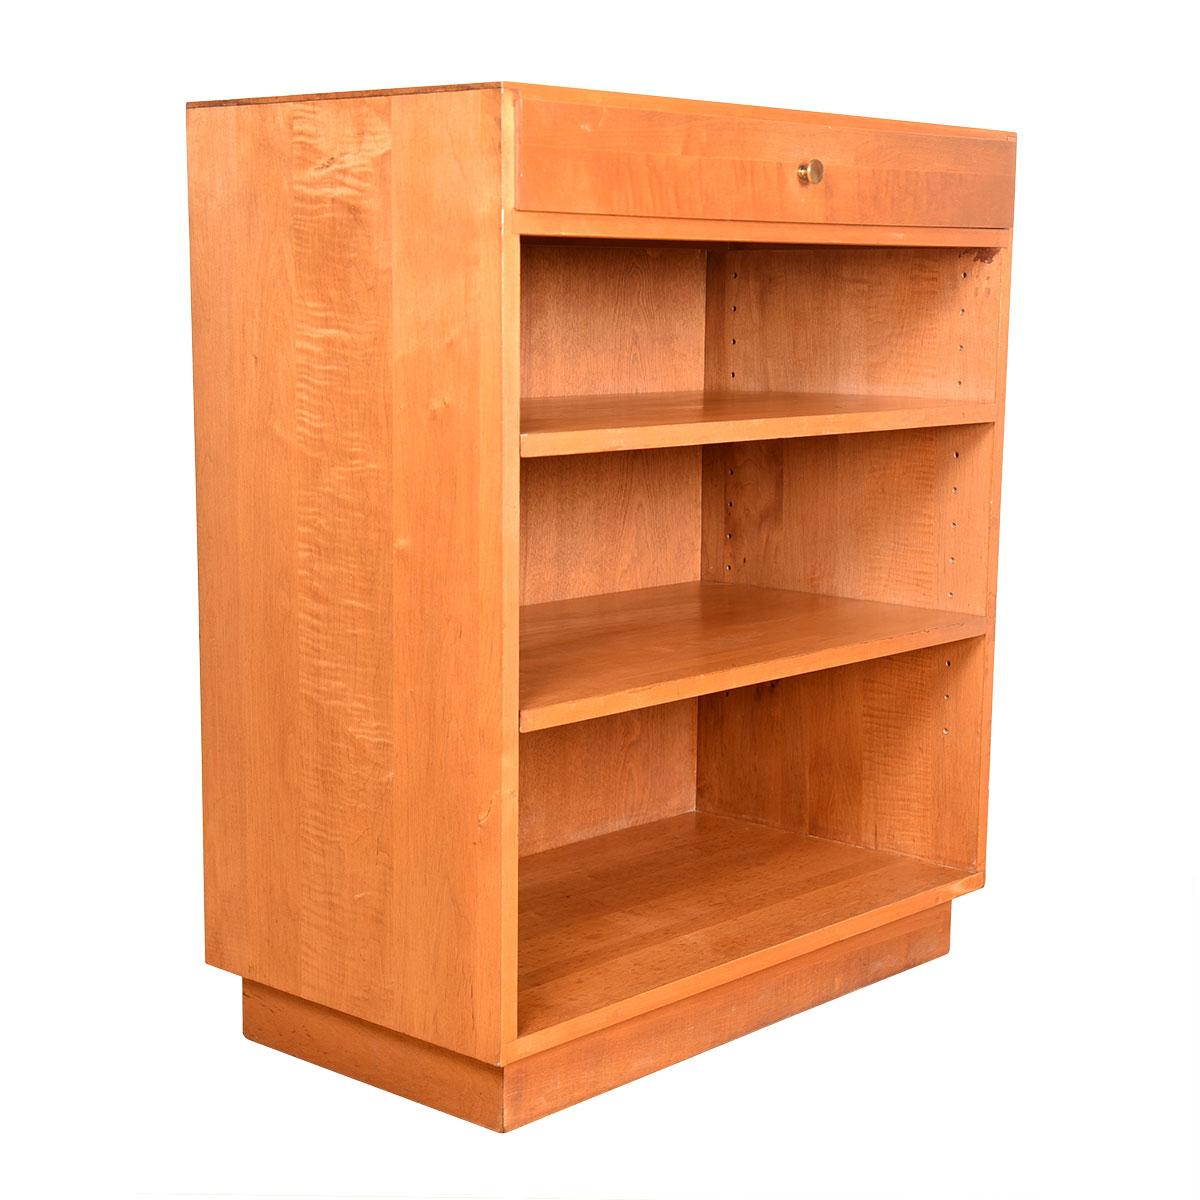 Great bookcase by Paul McCobb wit drawer on top.
Wonderful size with nice storage capacity in a small space.

